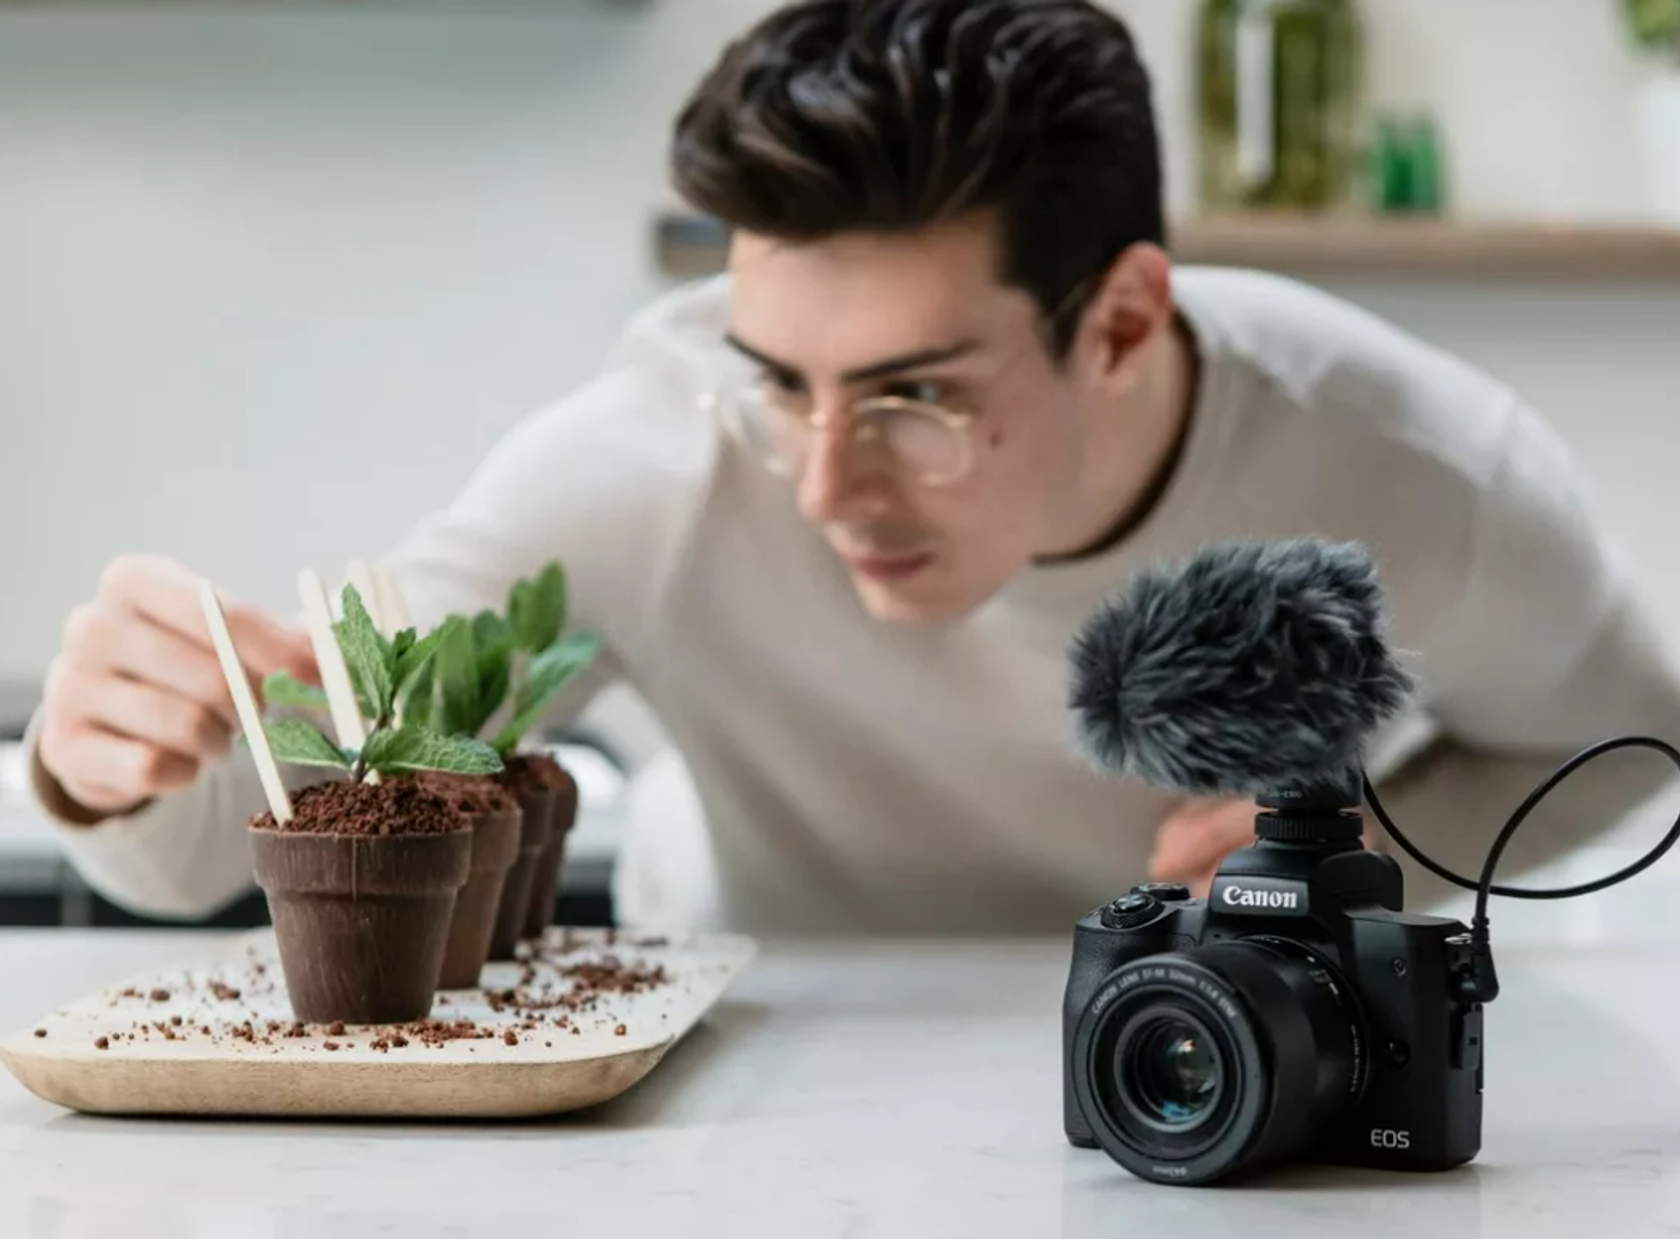 5 Sony Cameras for Beginners to Improve at Photography